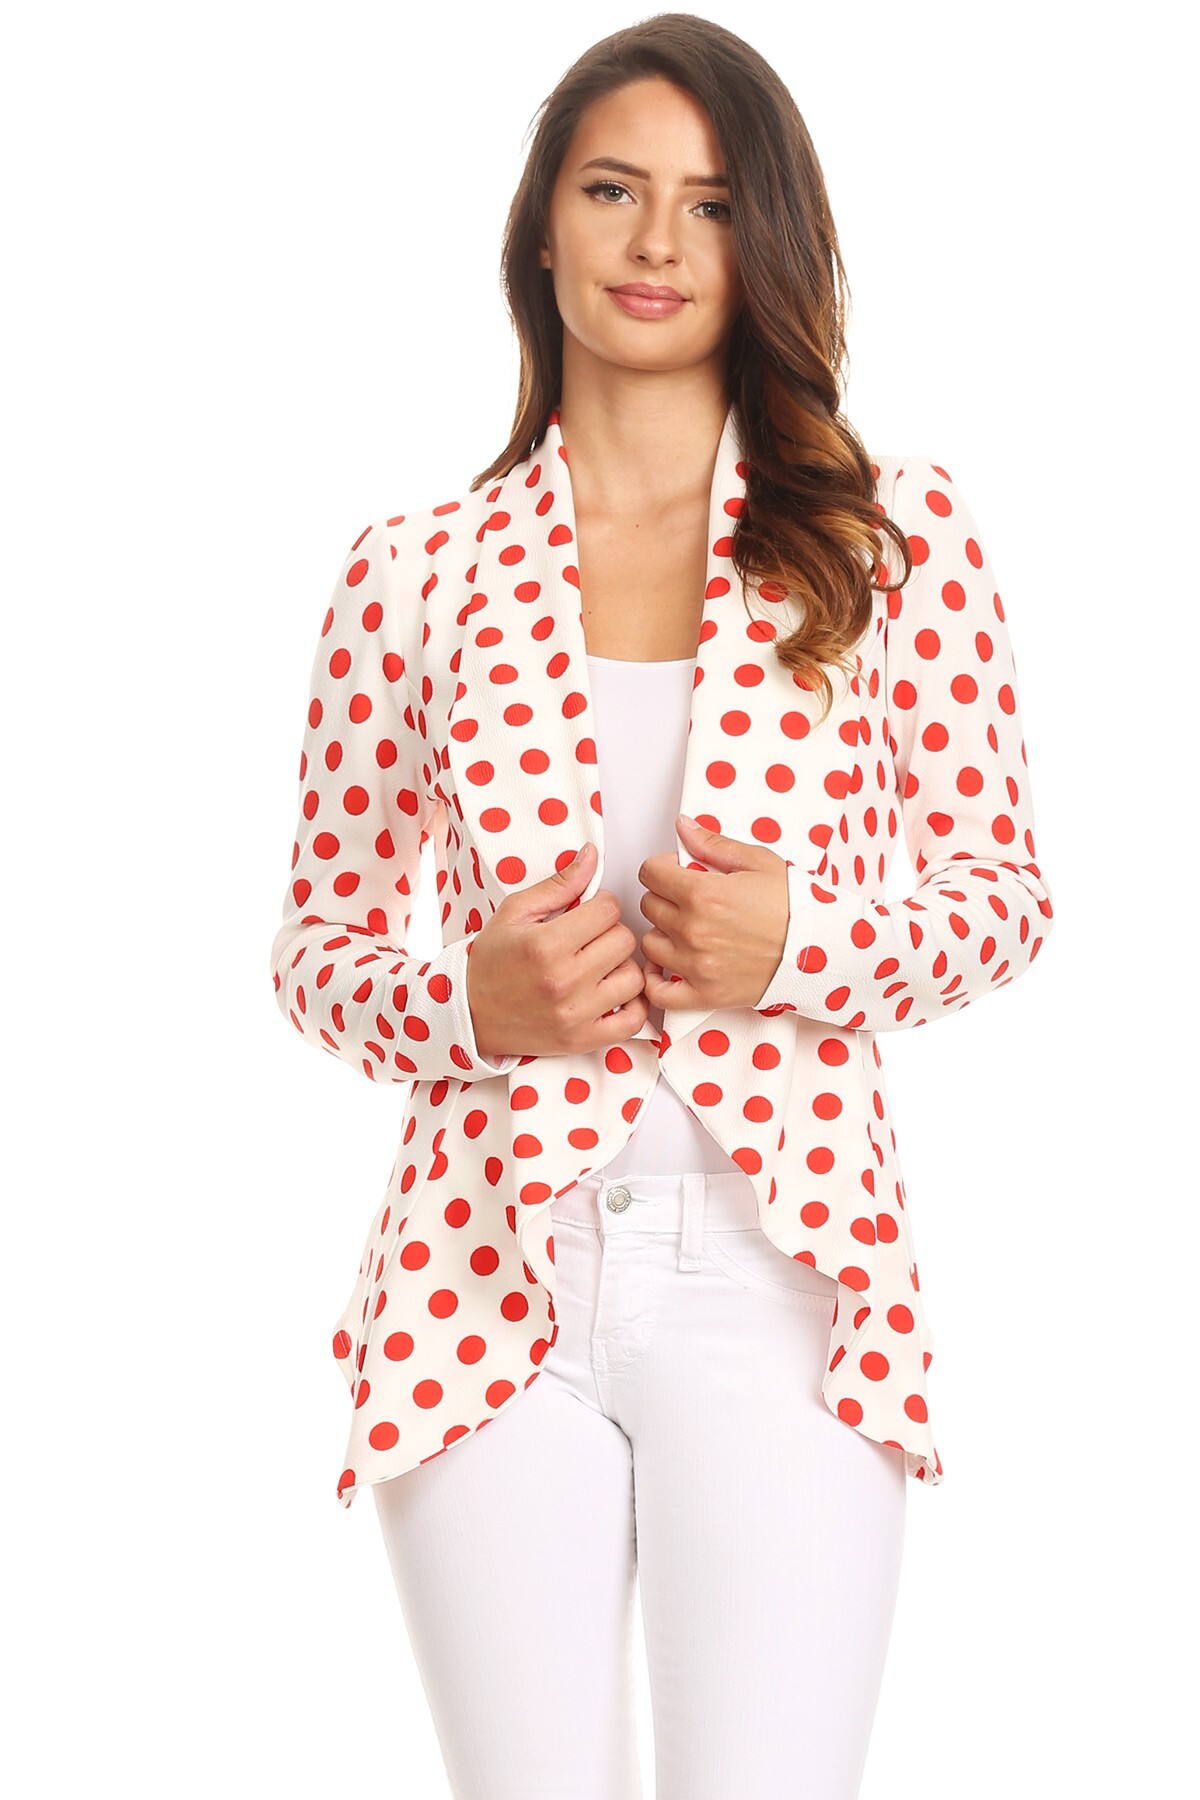 Moa Collection Women's Polka Dot Open Front Business Casual Work Office Long Sleeves Blazer Jacket